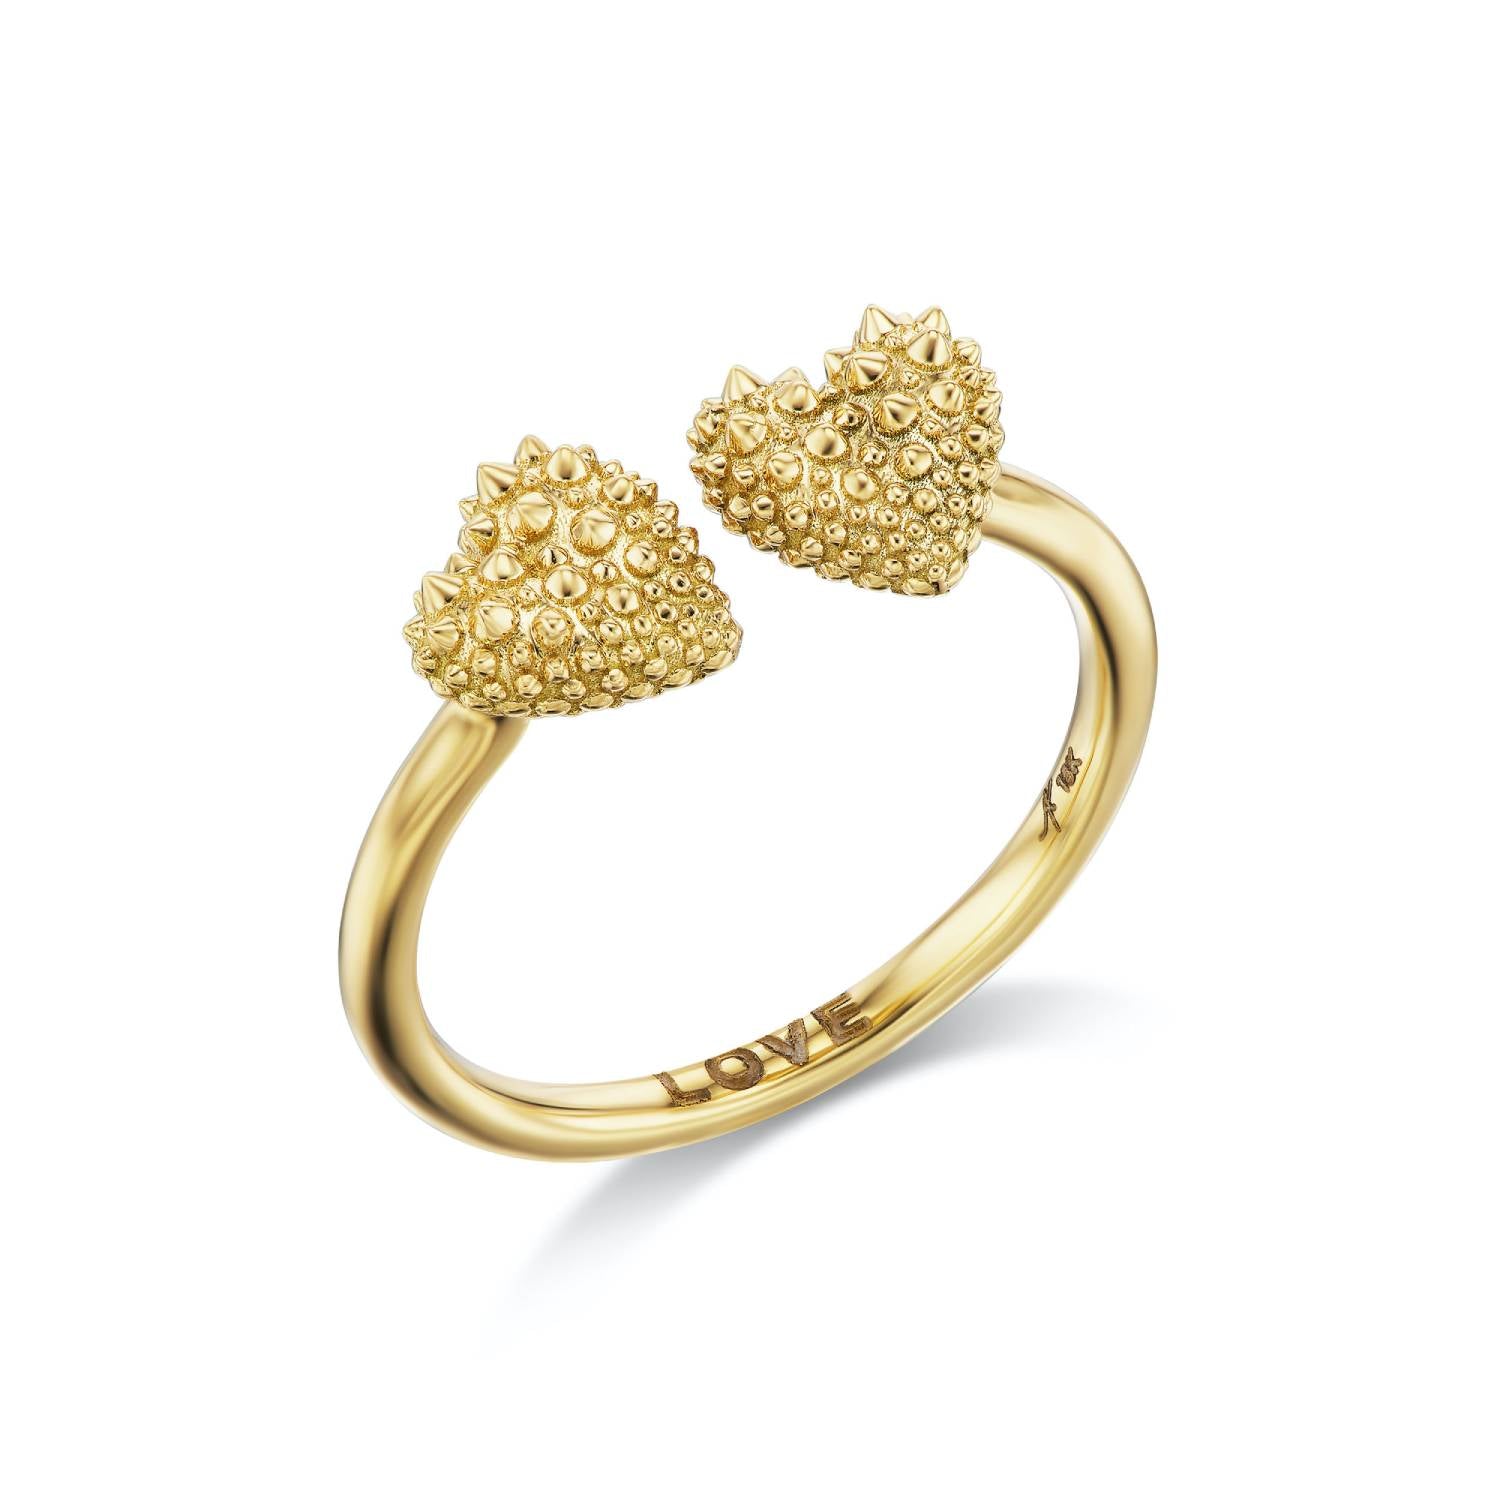 Buy Yellow Gold Rings for Women by Reliance Jewels Online | Ajio.com